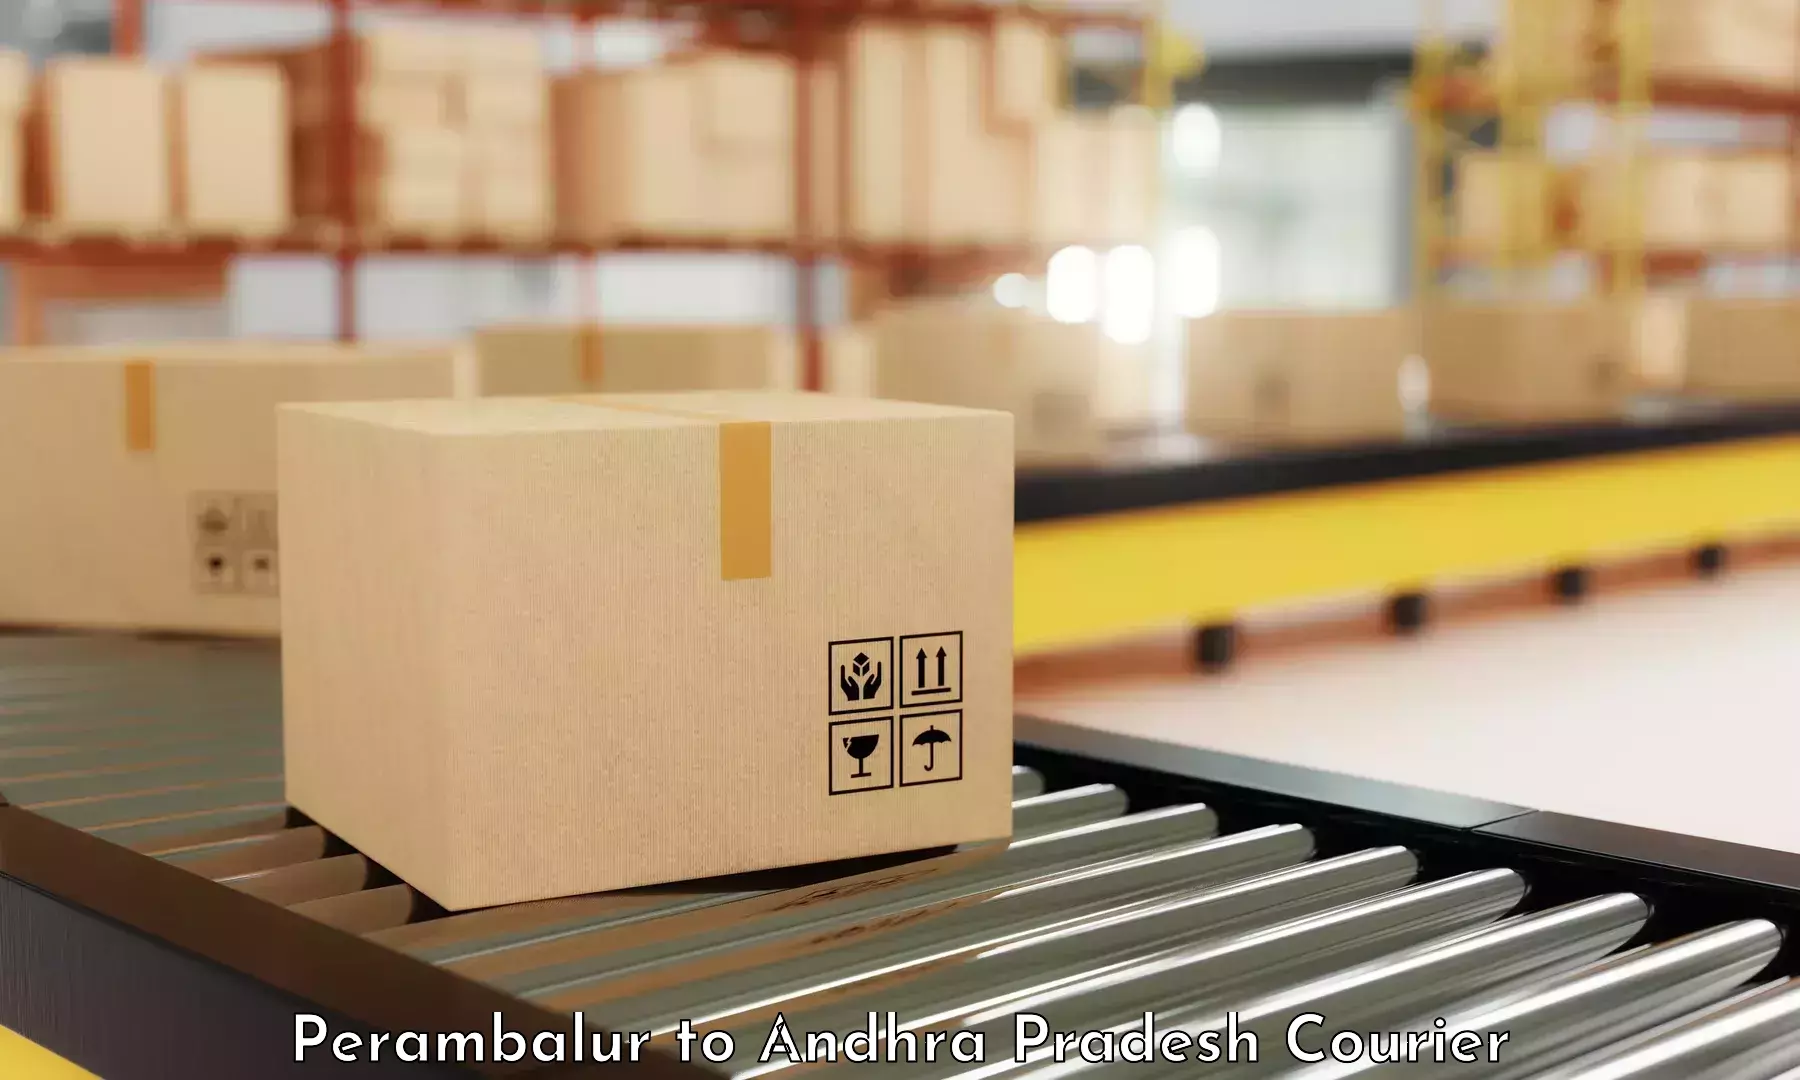 State-of-the-art courier technology Perambalur to Visakhapatnam Port